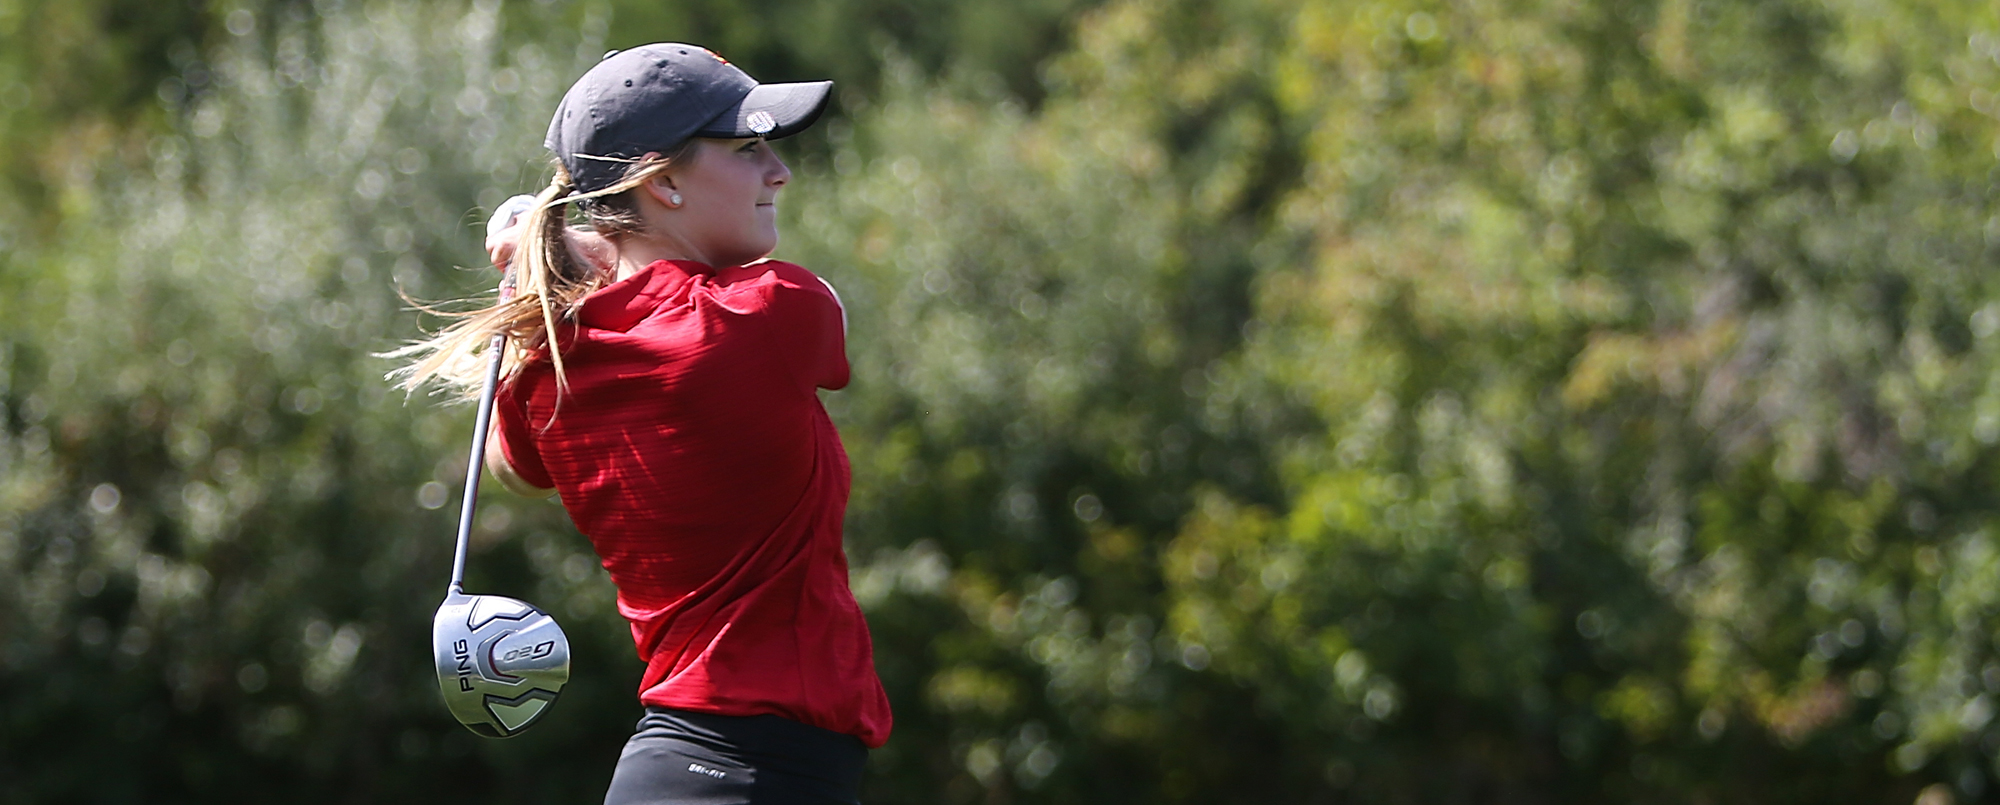 Booton cards low round at IIAC Championship, Storm in fifth place